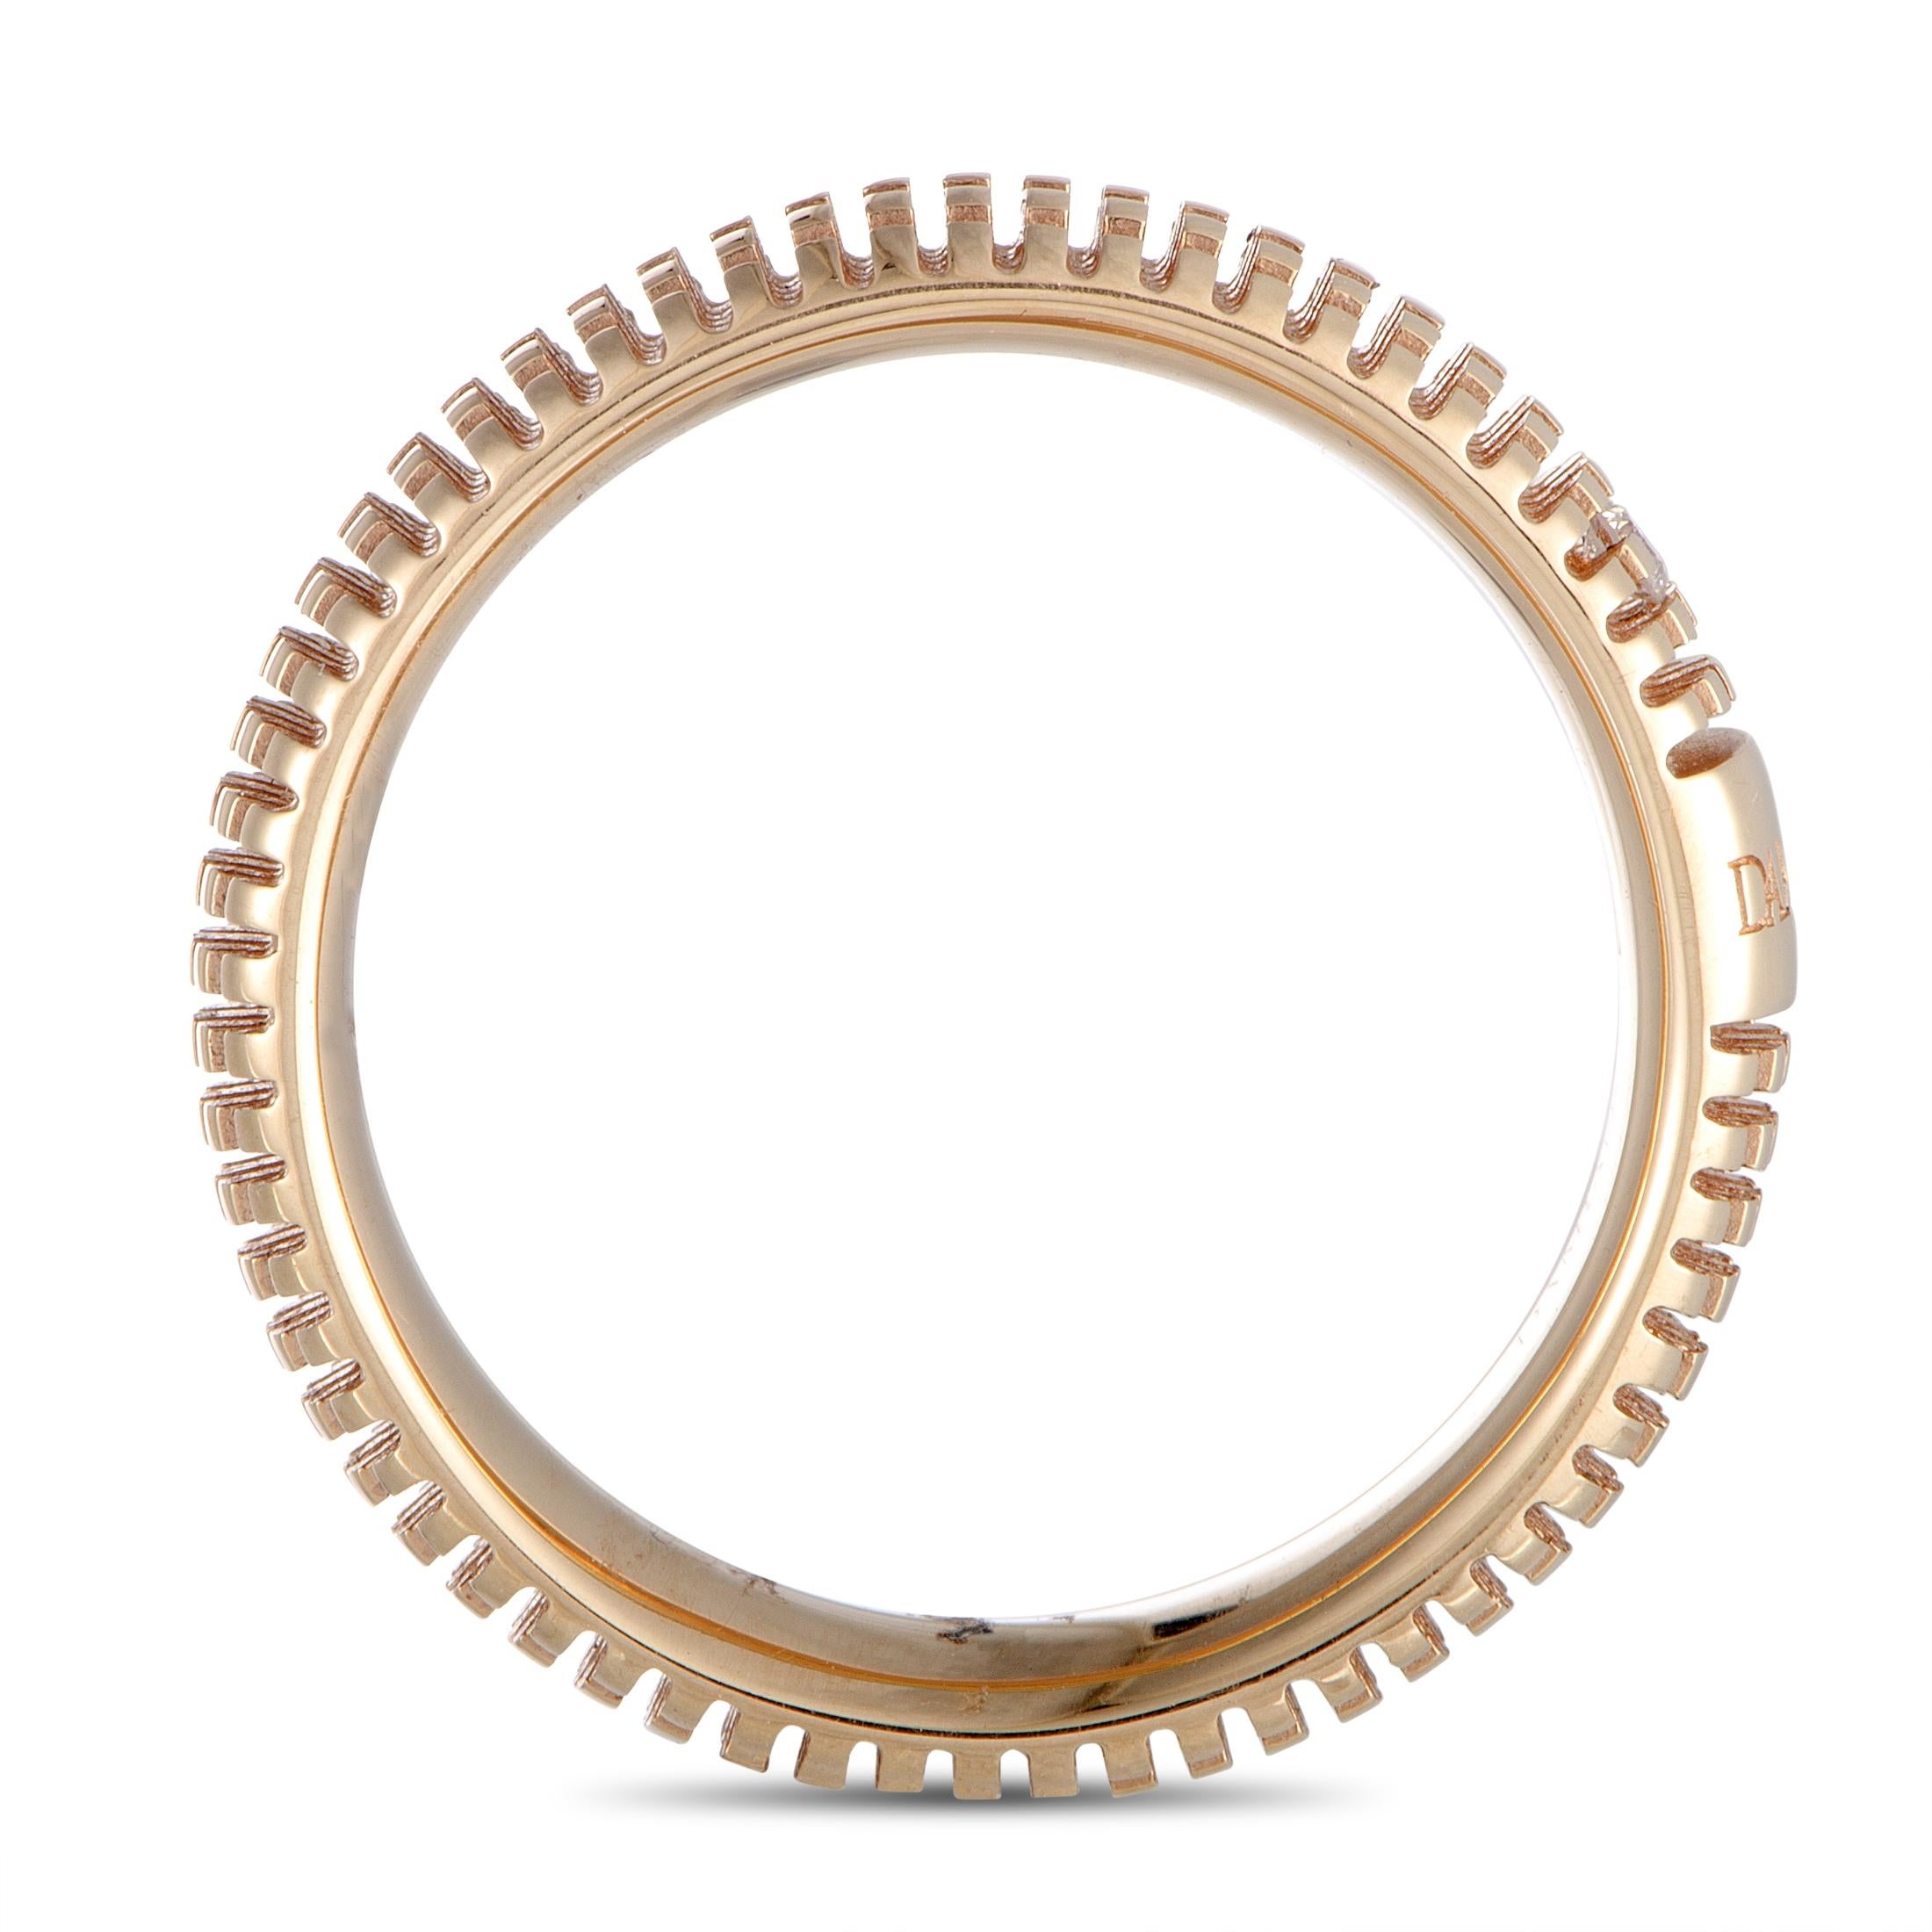 The Damiani “Metropolitan” ring is crafted from 18K rose gold and boasts band thickness of 4 mm. It weighs 4.8 grams and is set with a 0.01 ct diamond stone.
 
 This ring is offered in brand new condition and includes the manufacturer’s box and